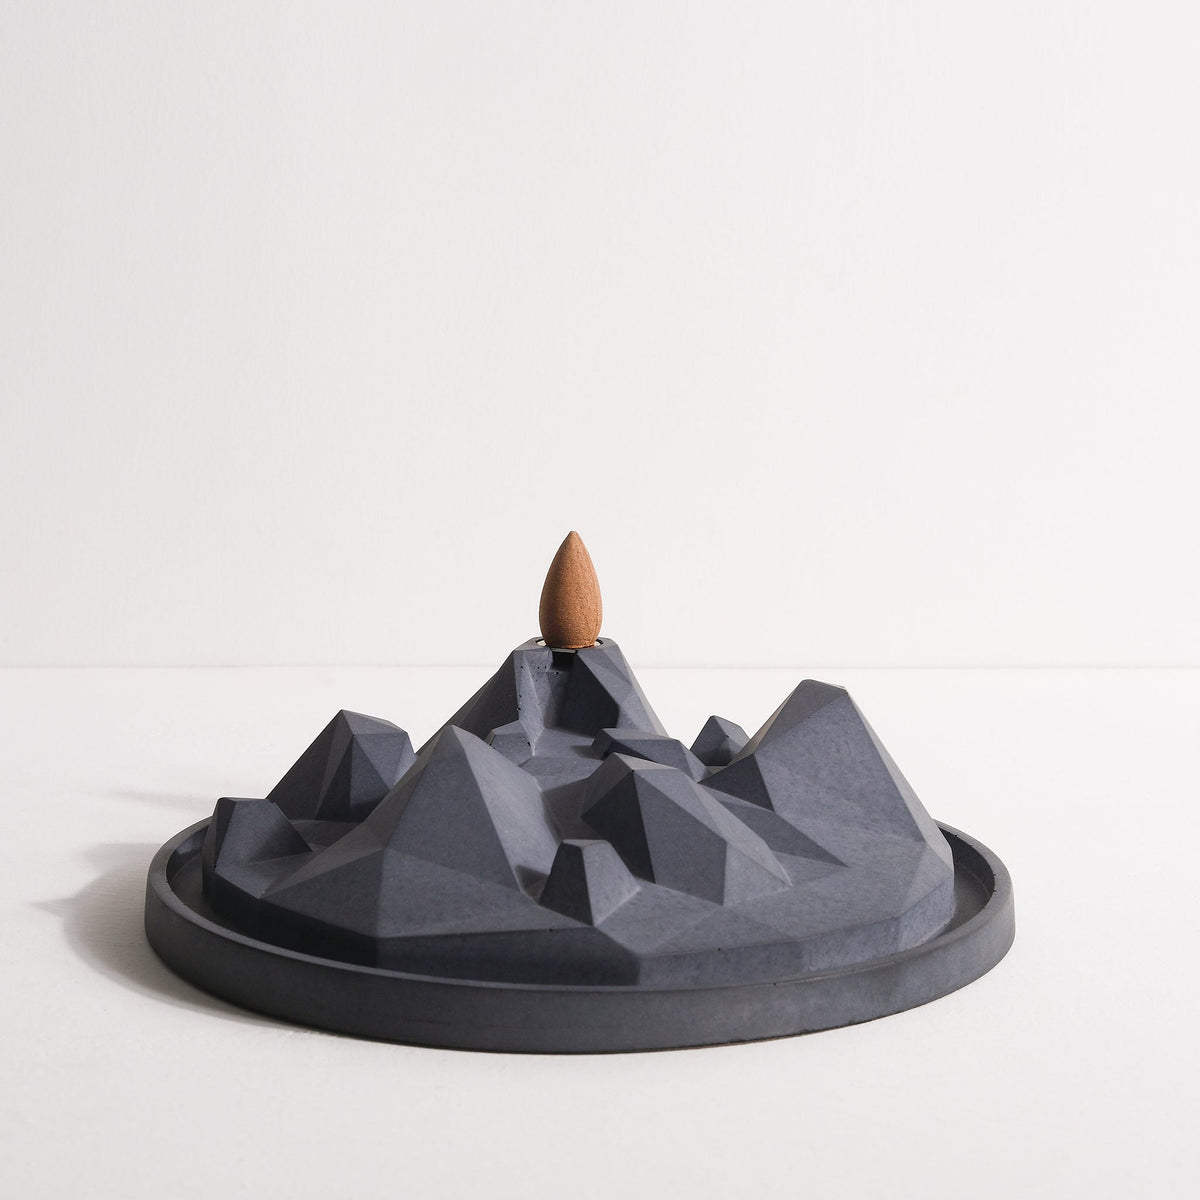 Alternative View of Valley of Fog Backflow Incense Burner as part of Kin Objects Gift Set